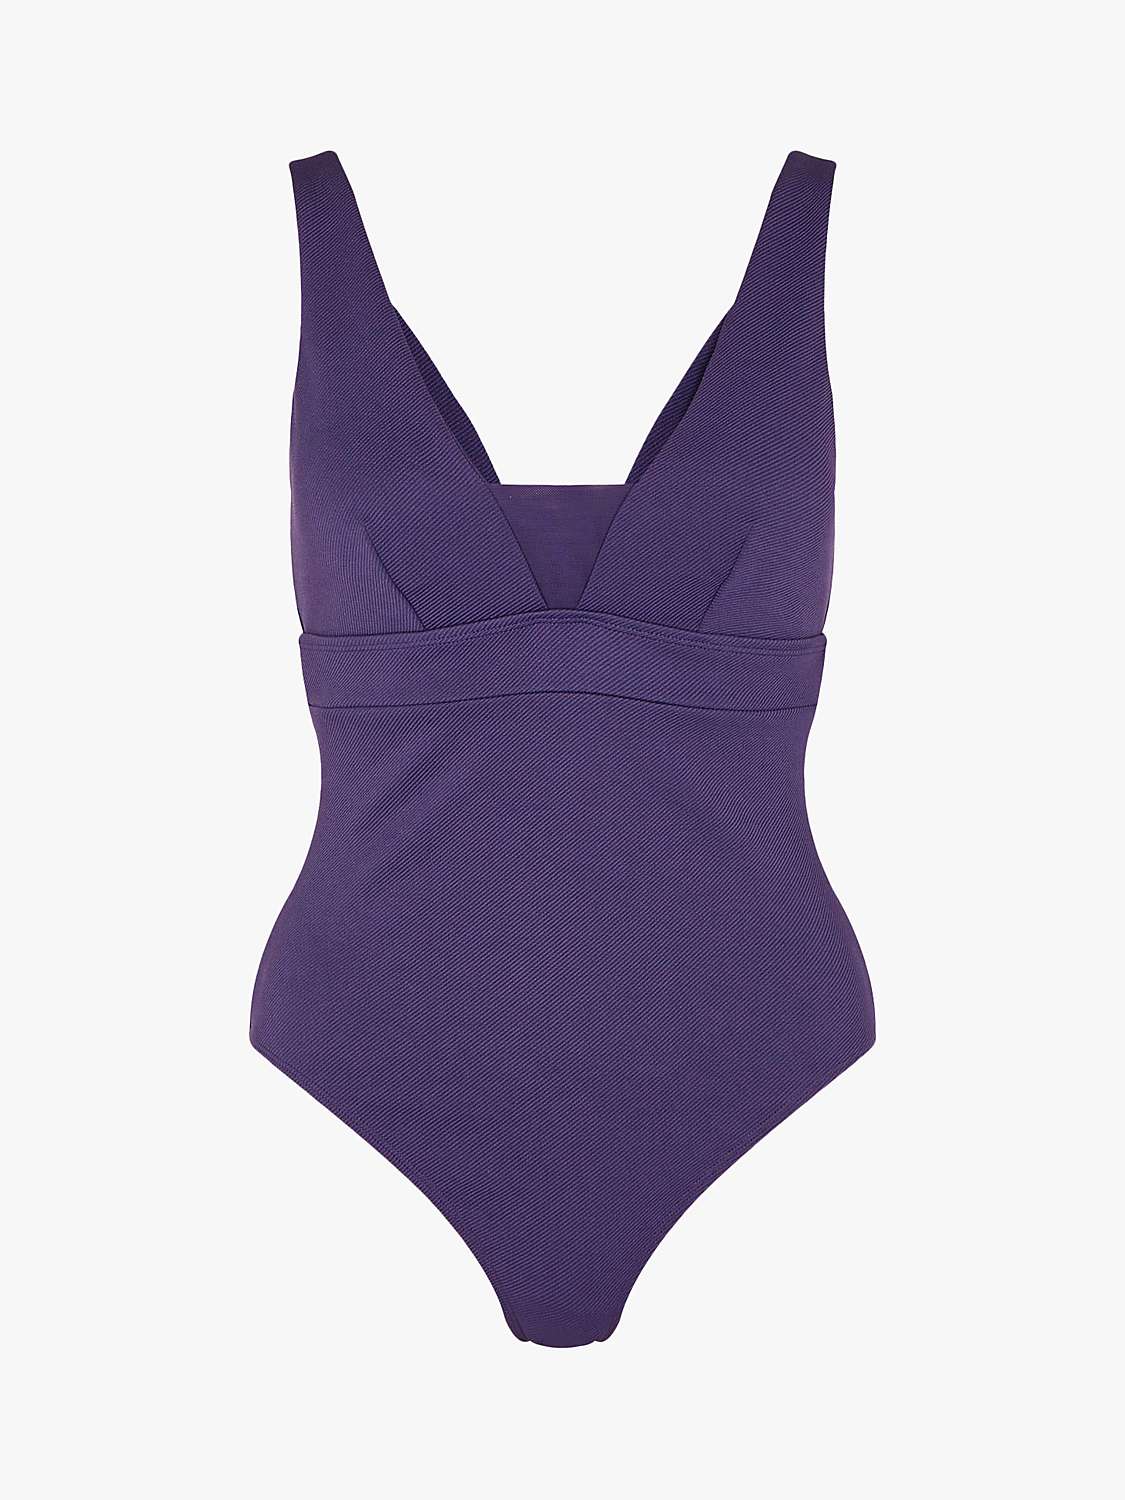 Buy Accessorize Rib Lexi Shaping Swimsuit, Navy Online at johnlewis.com